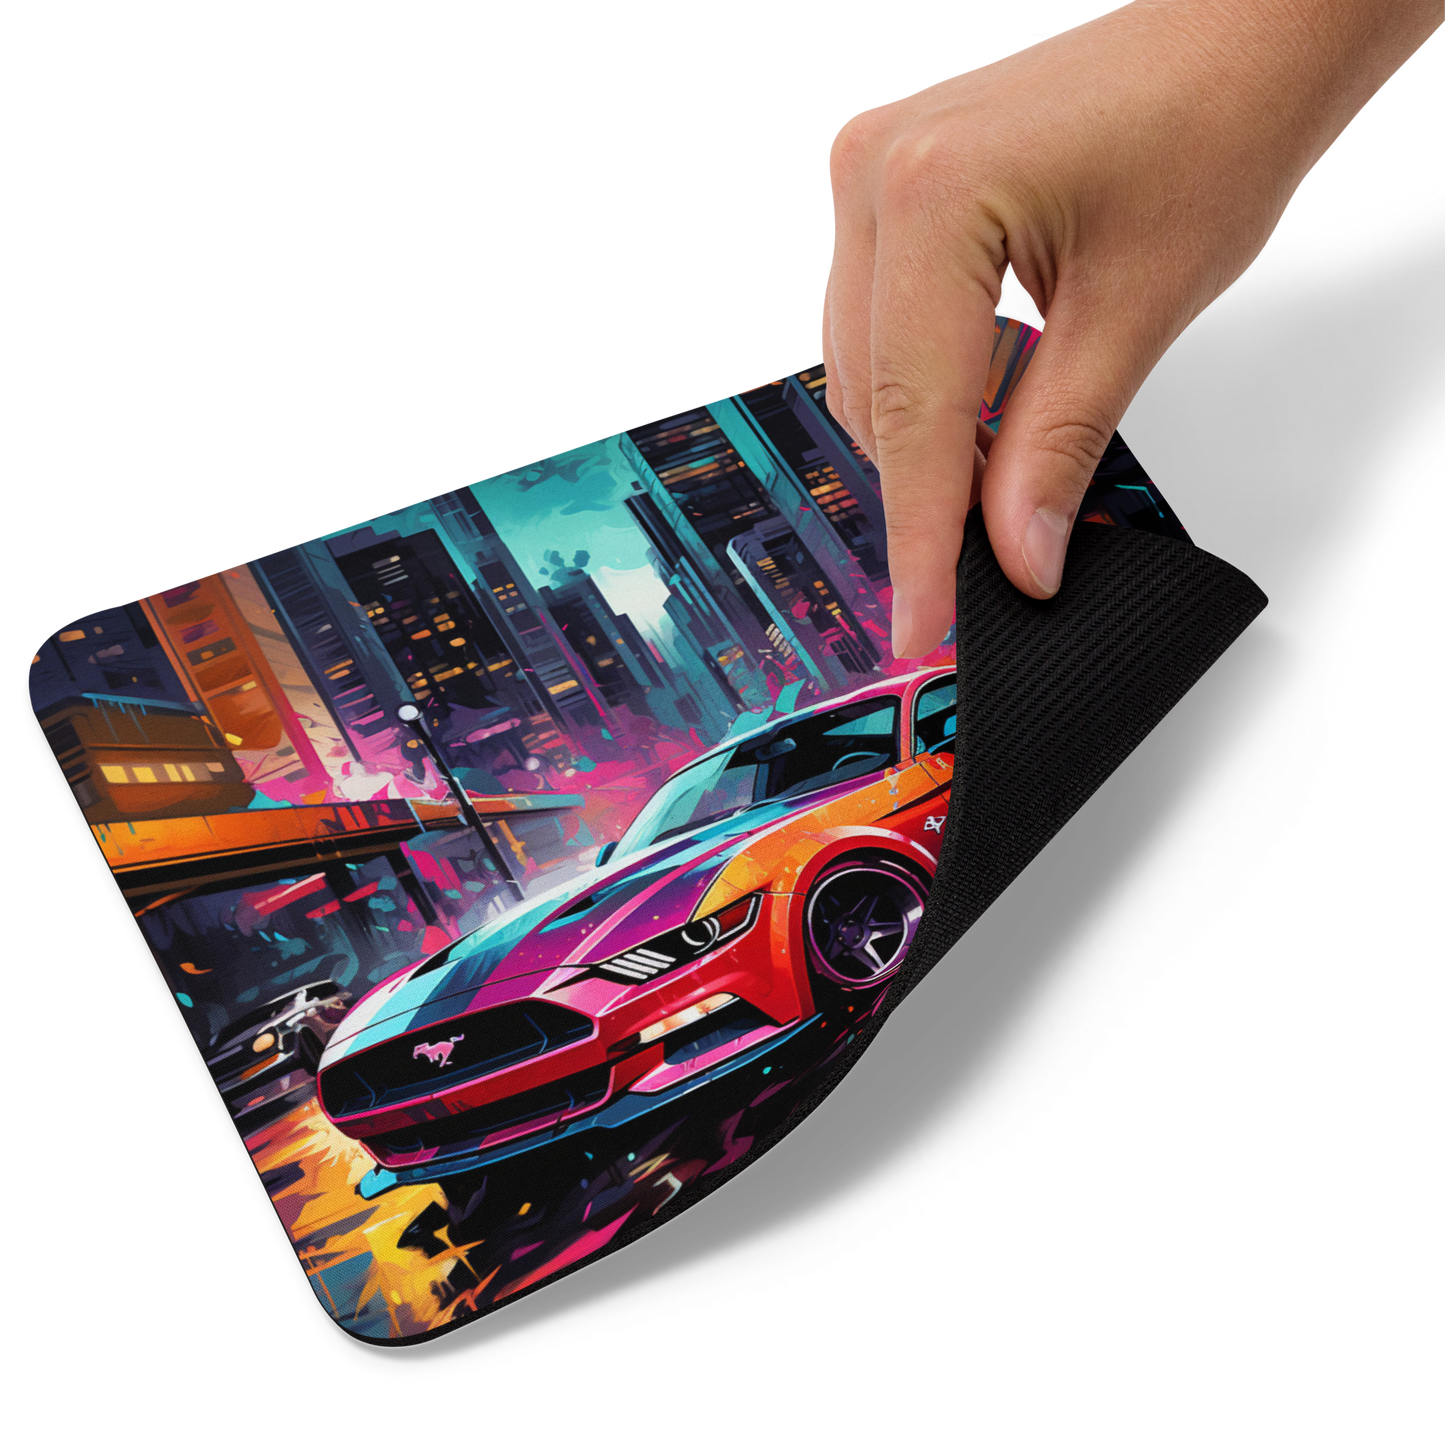 Mustang Small Mousepad for Desktops, Non-Slip Rubber Base, Waterproof Mouse Mat, Mini Mouse Pad for Women Kids Men, Gaming Mouse Mat for Computer Laptop Home Office